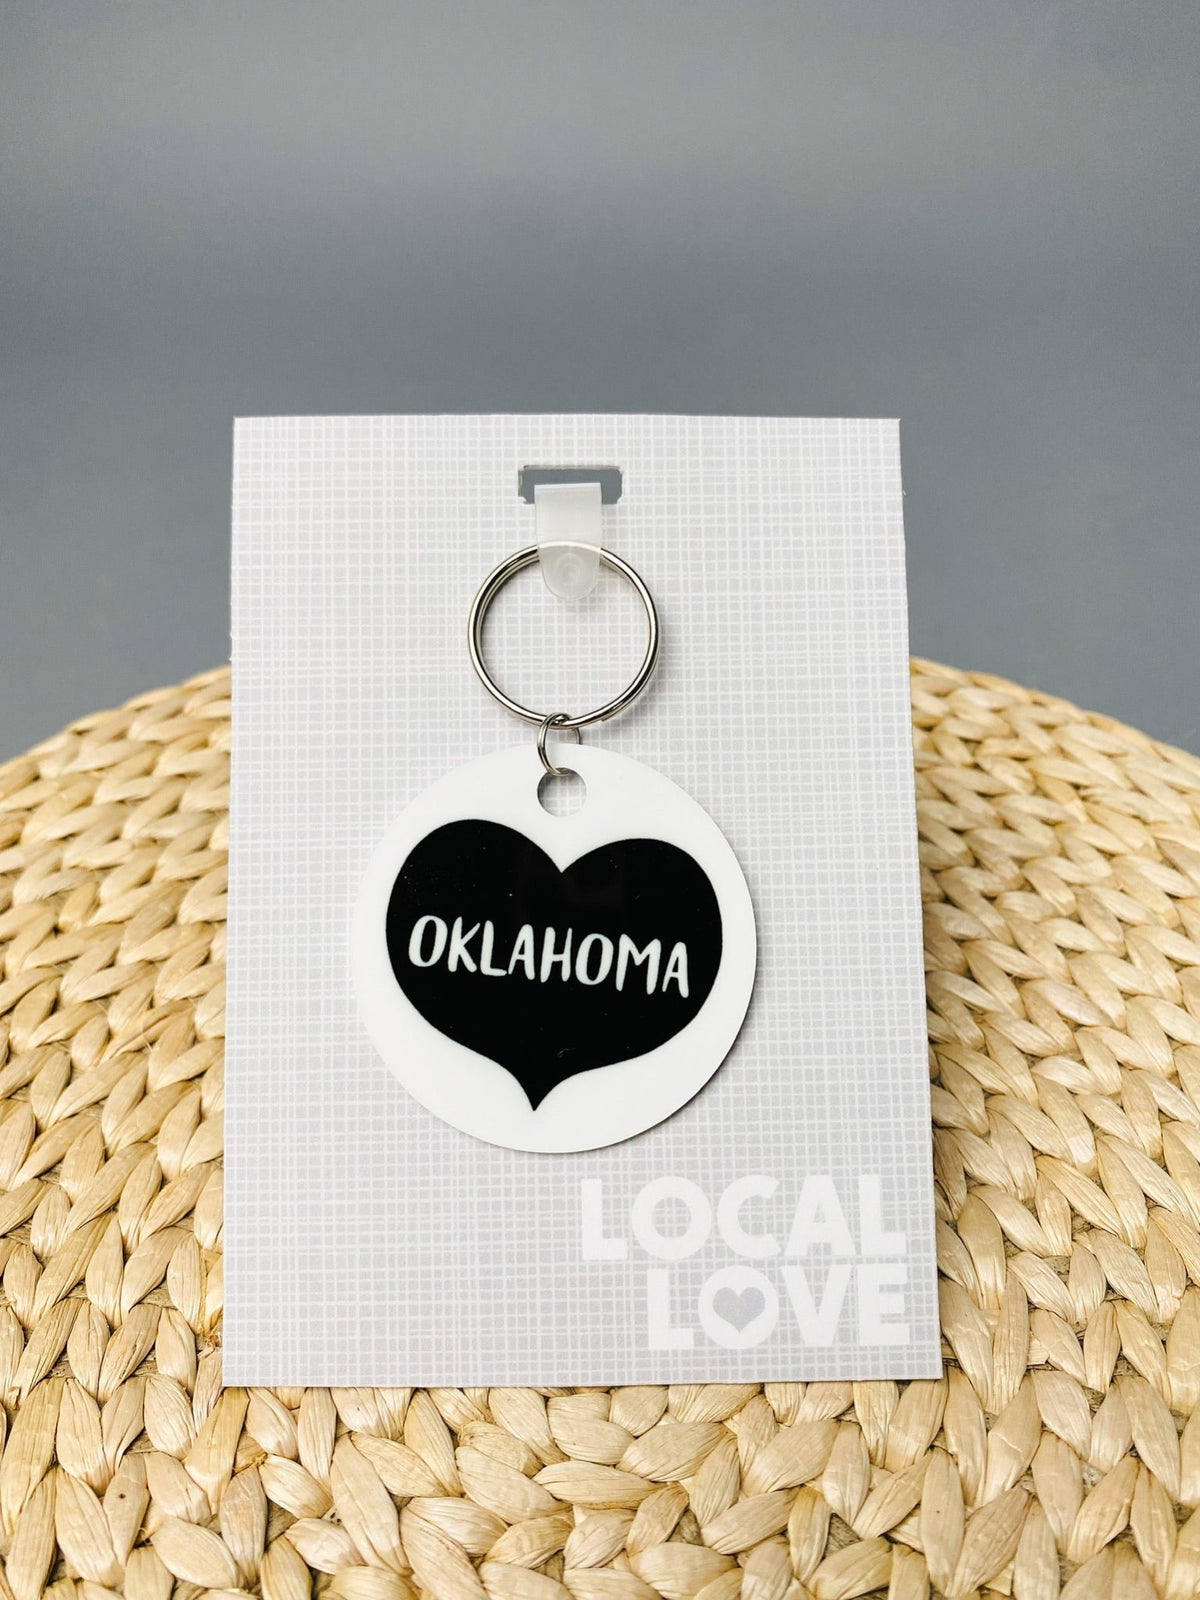 Oklahoma big heart keychain black - Trendy Gifts at Lush Fashion Lounge Boutique in Oklahoma City